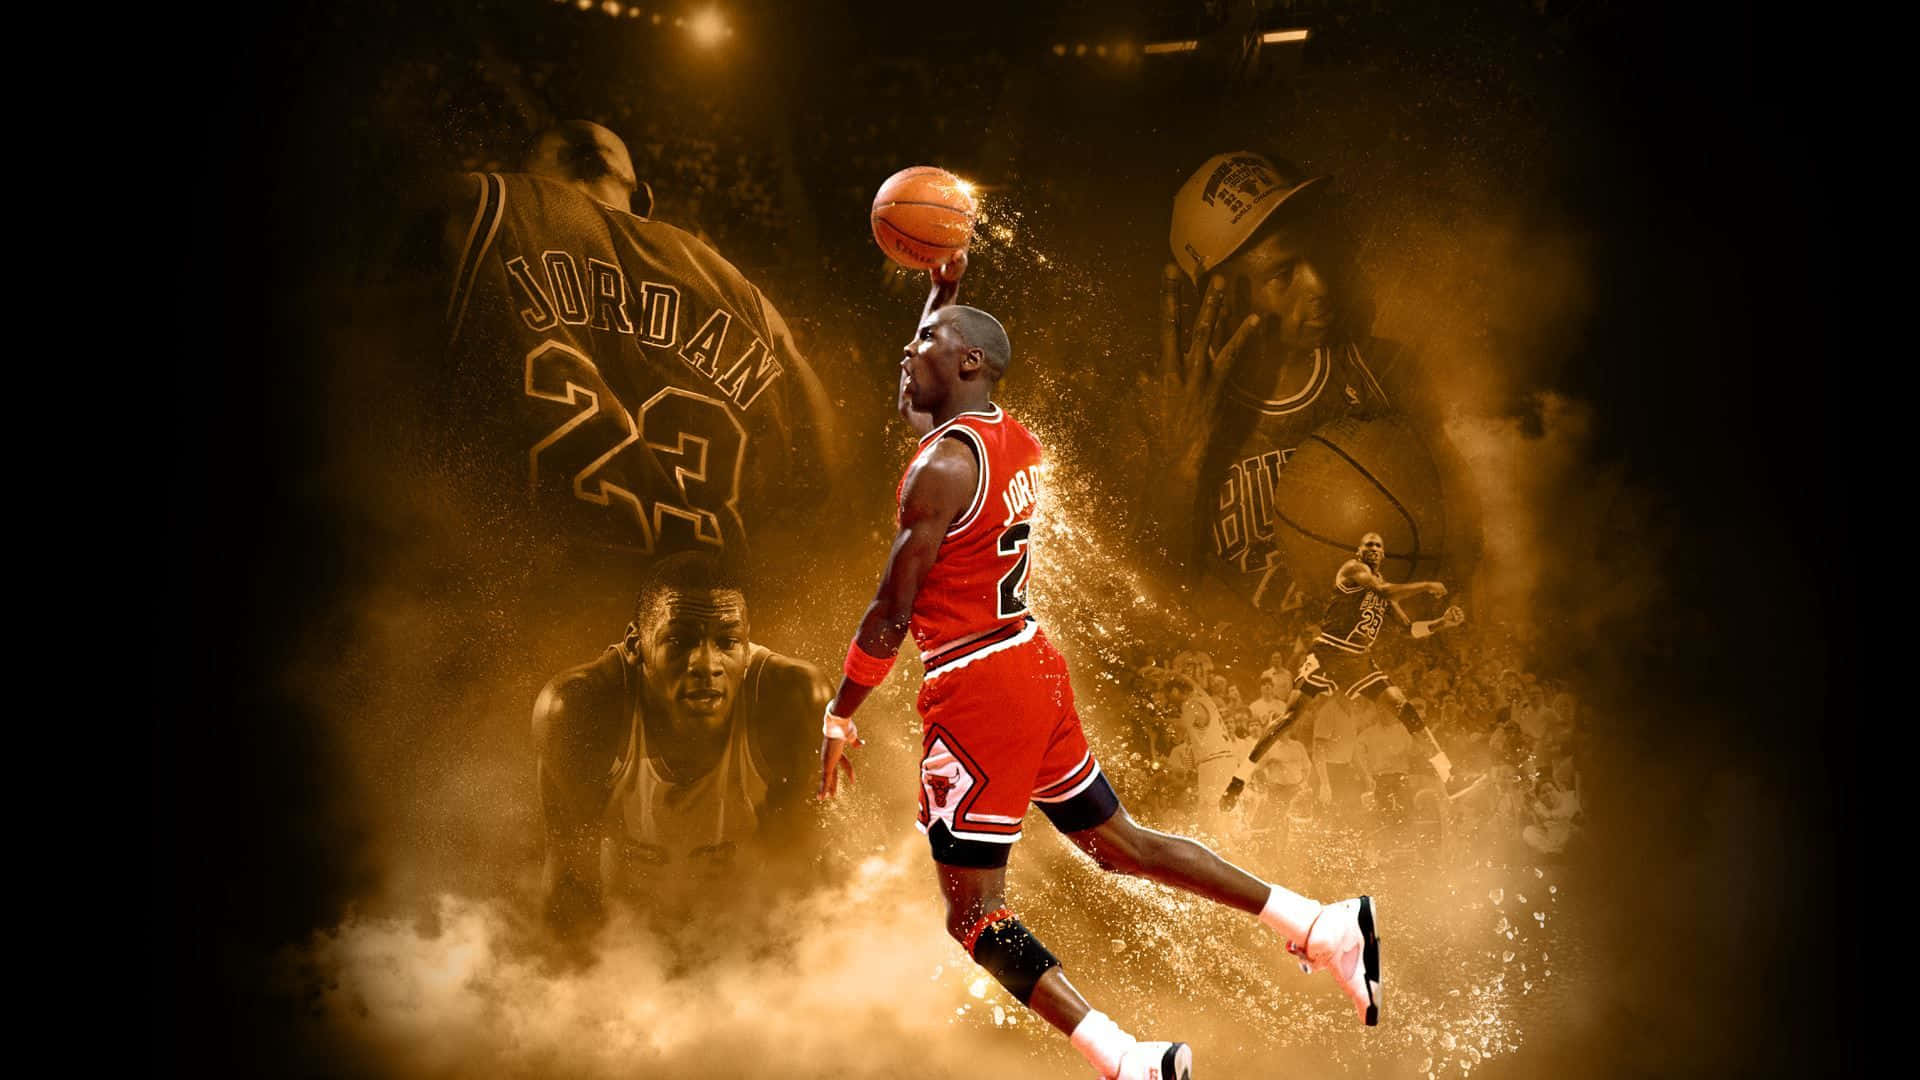 Nba 2k Michael Jordan Dunk (in English) Would Translate To Nba 2k Michael Jordan Dunk (in Swedish) Directly. However, If We Were To Add A Context Of Computer Or Mobile Wallpaper, We Can Say 